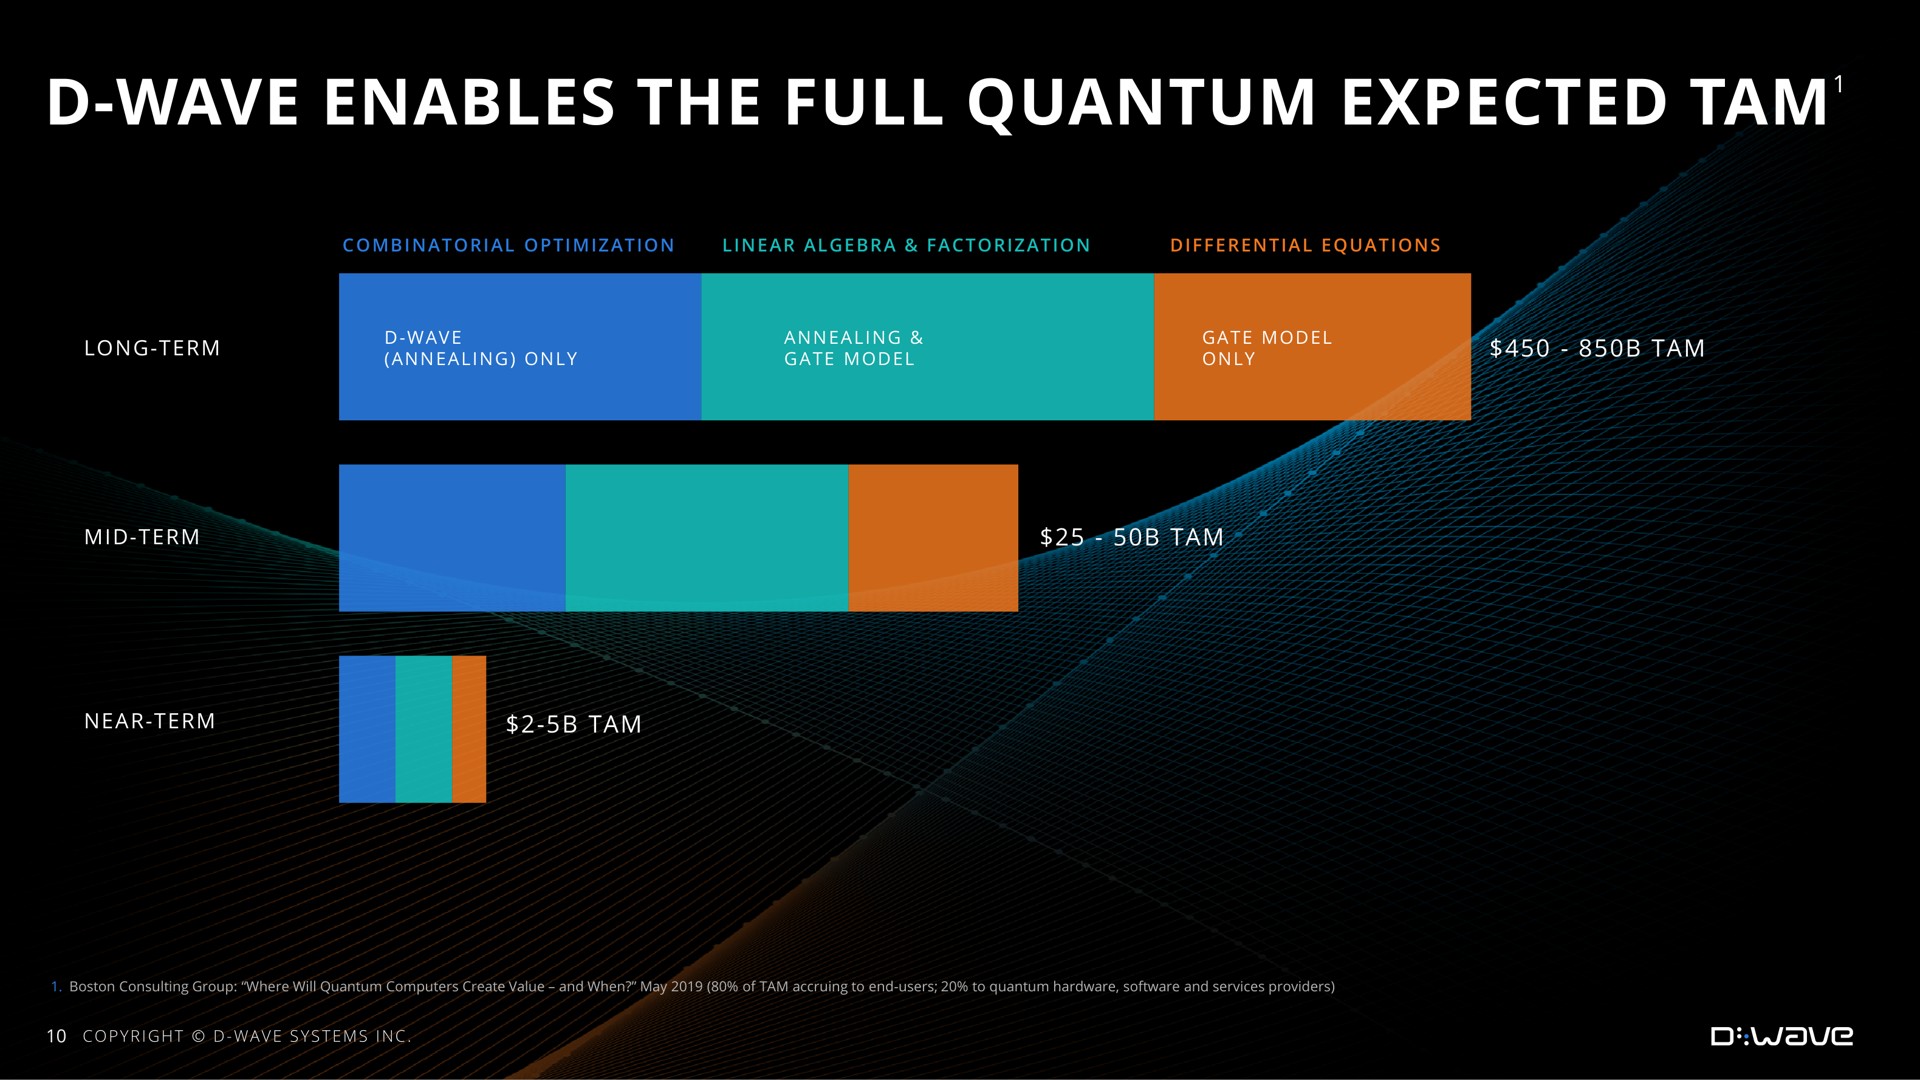 wave enables the full quantum expected tam tam | D-Wave